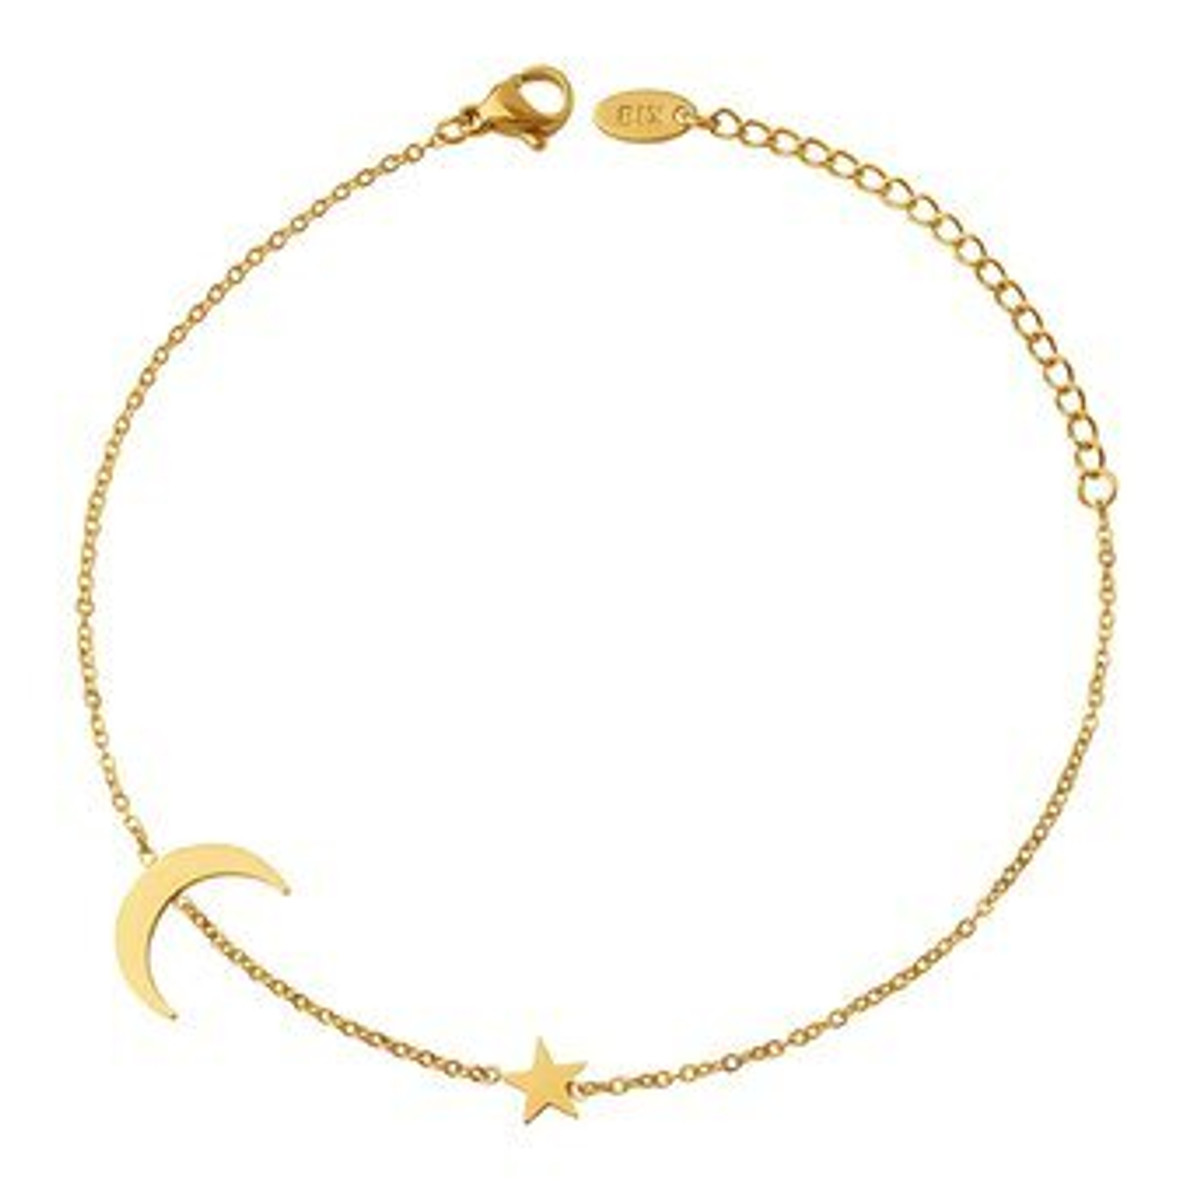 Little Star, 18K gold plated Stainless steel anklet